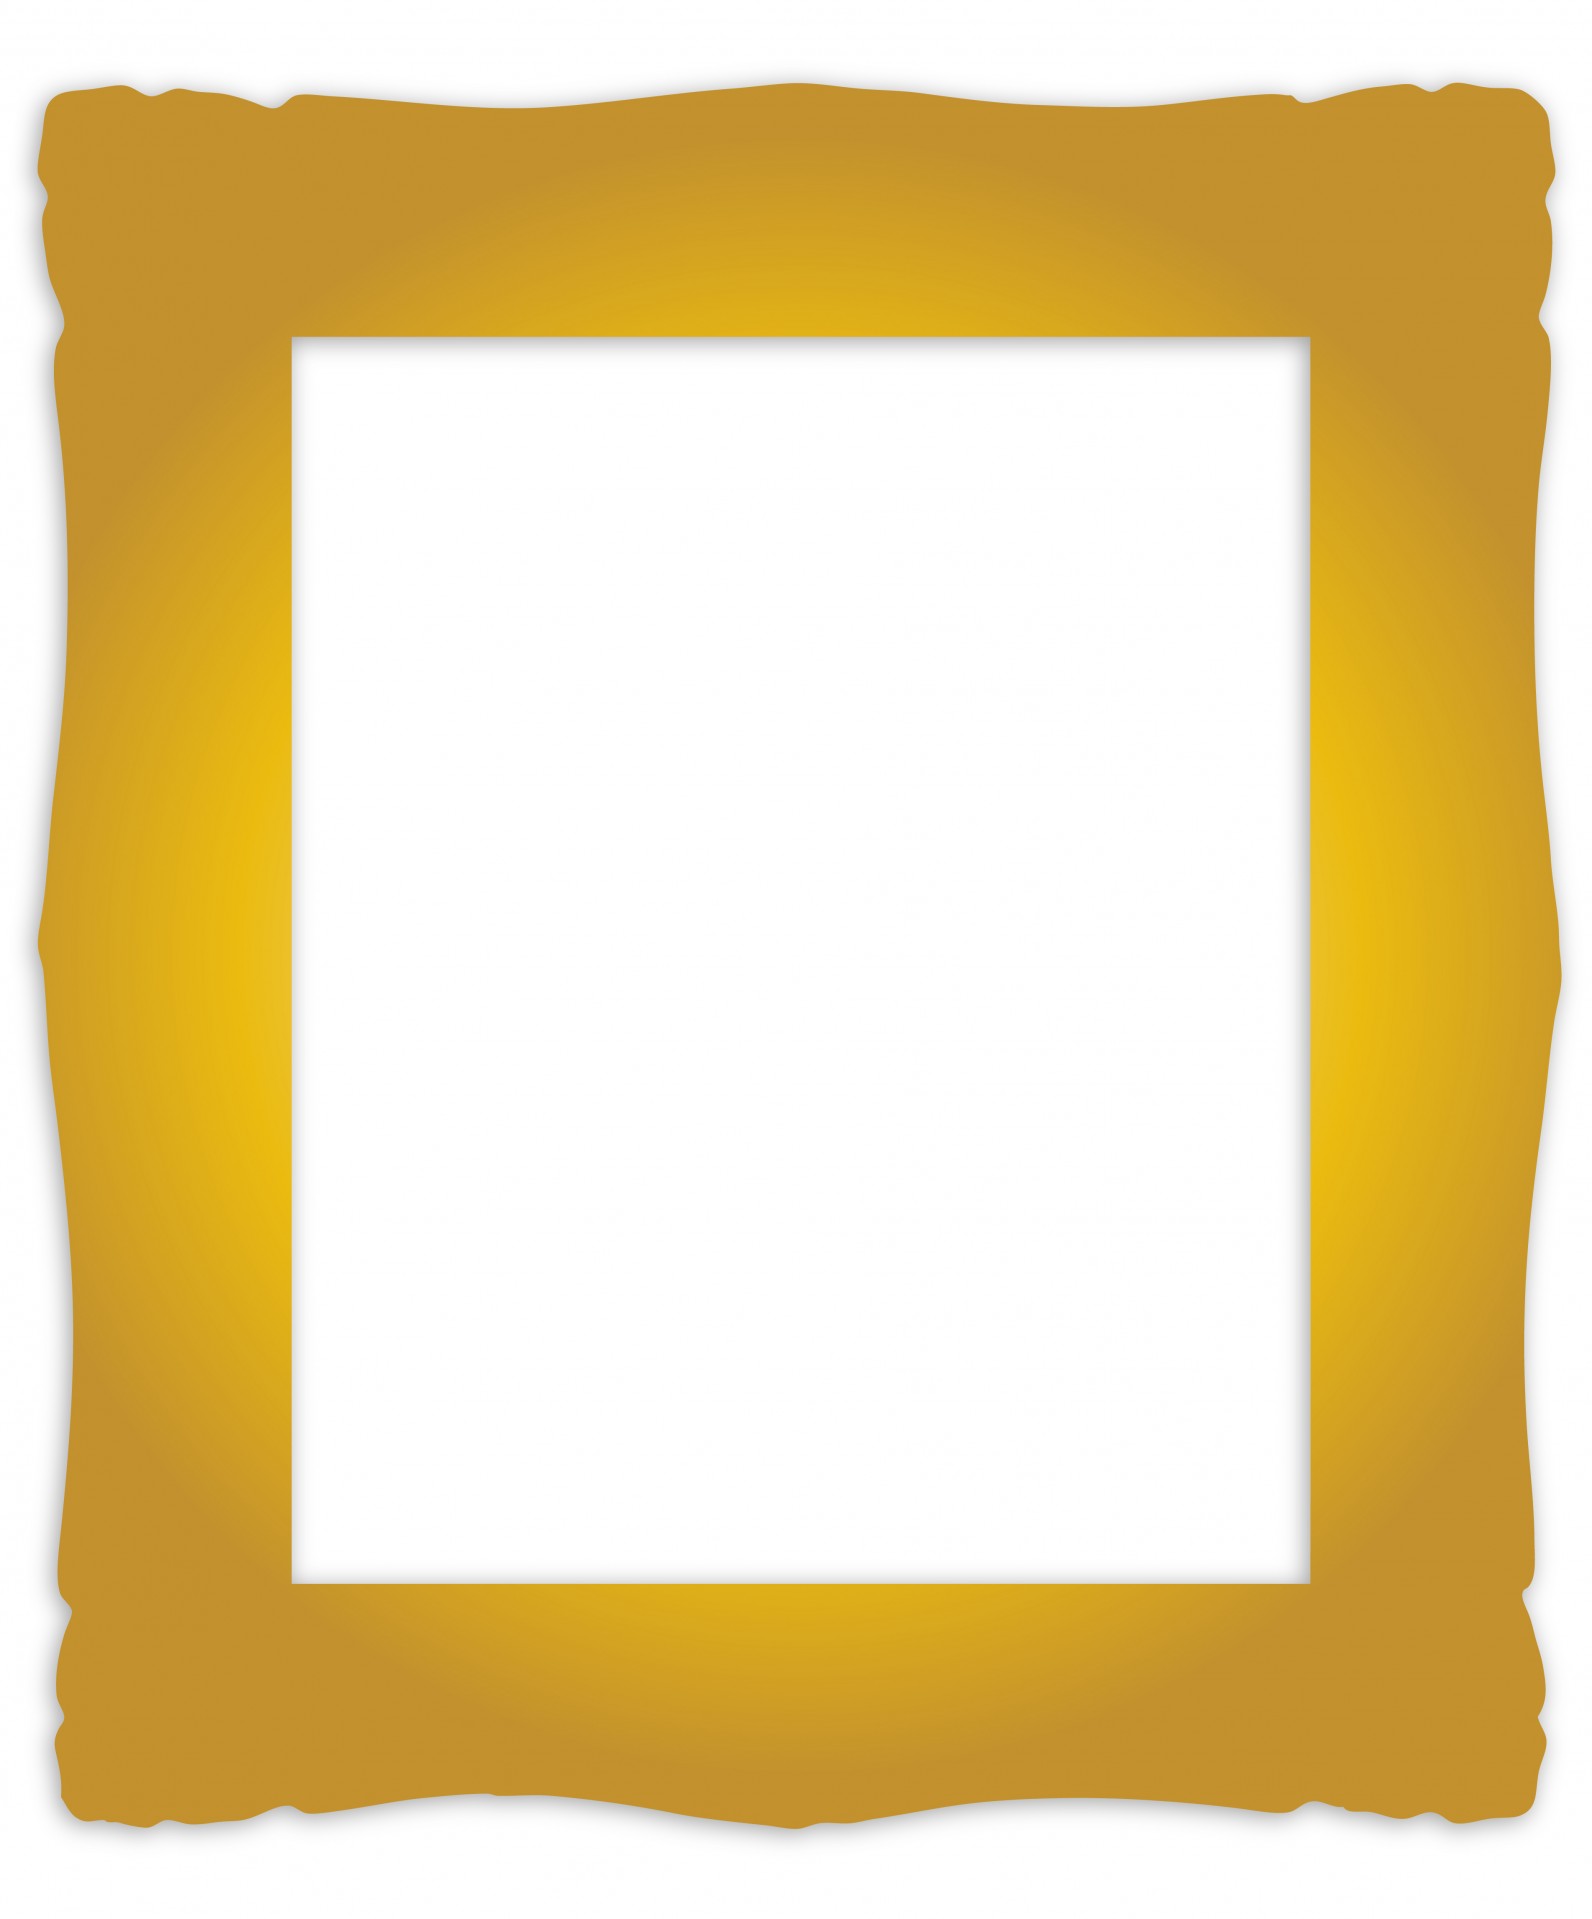 Gold Frame Vintage Clipart Free Stock Photo.